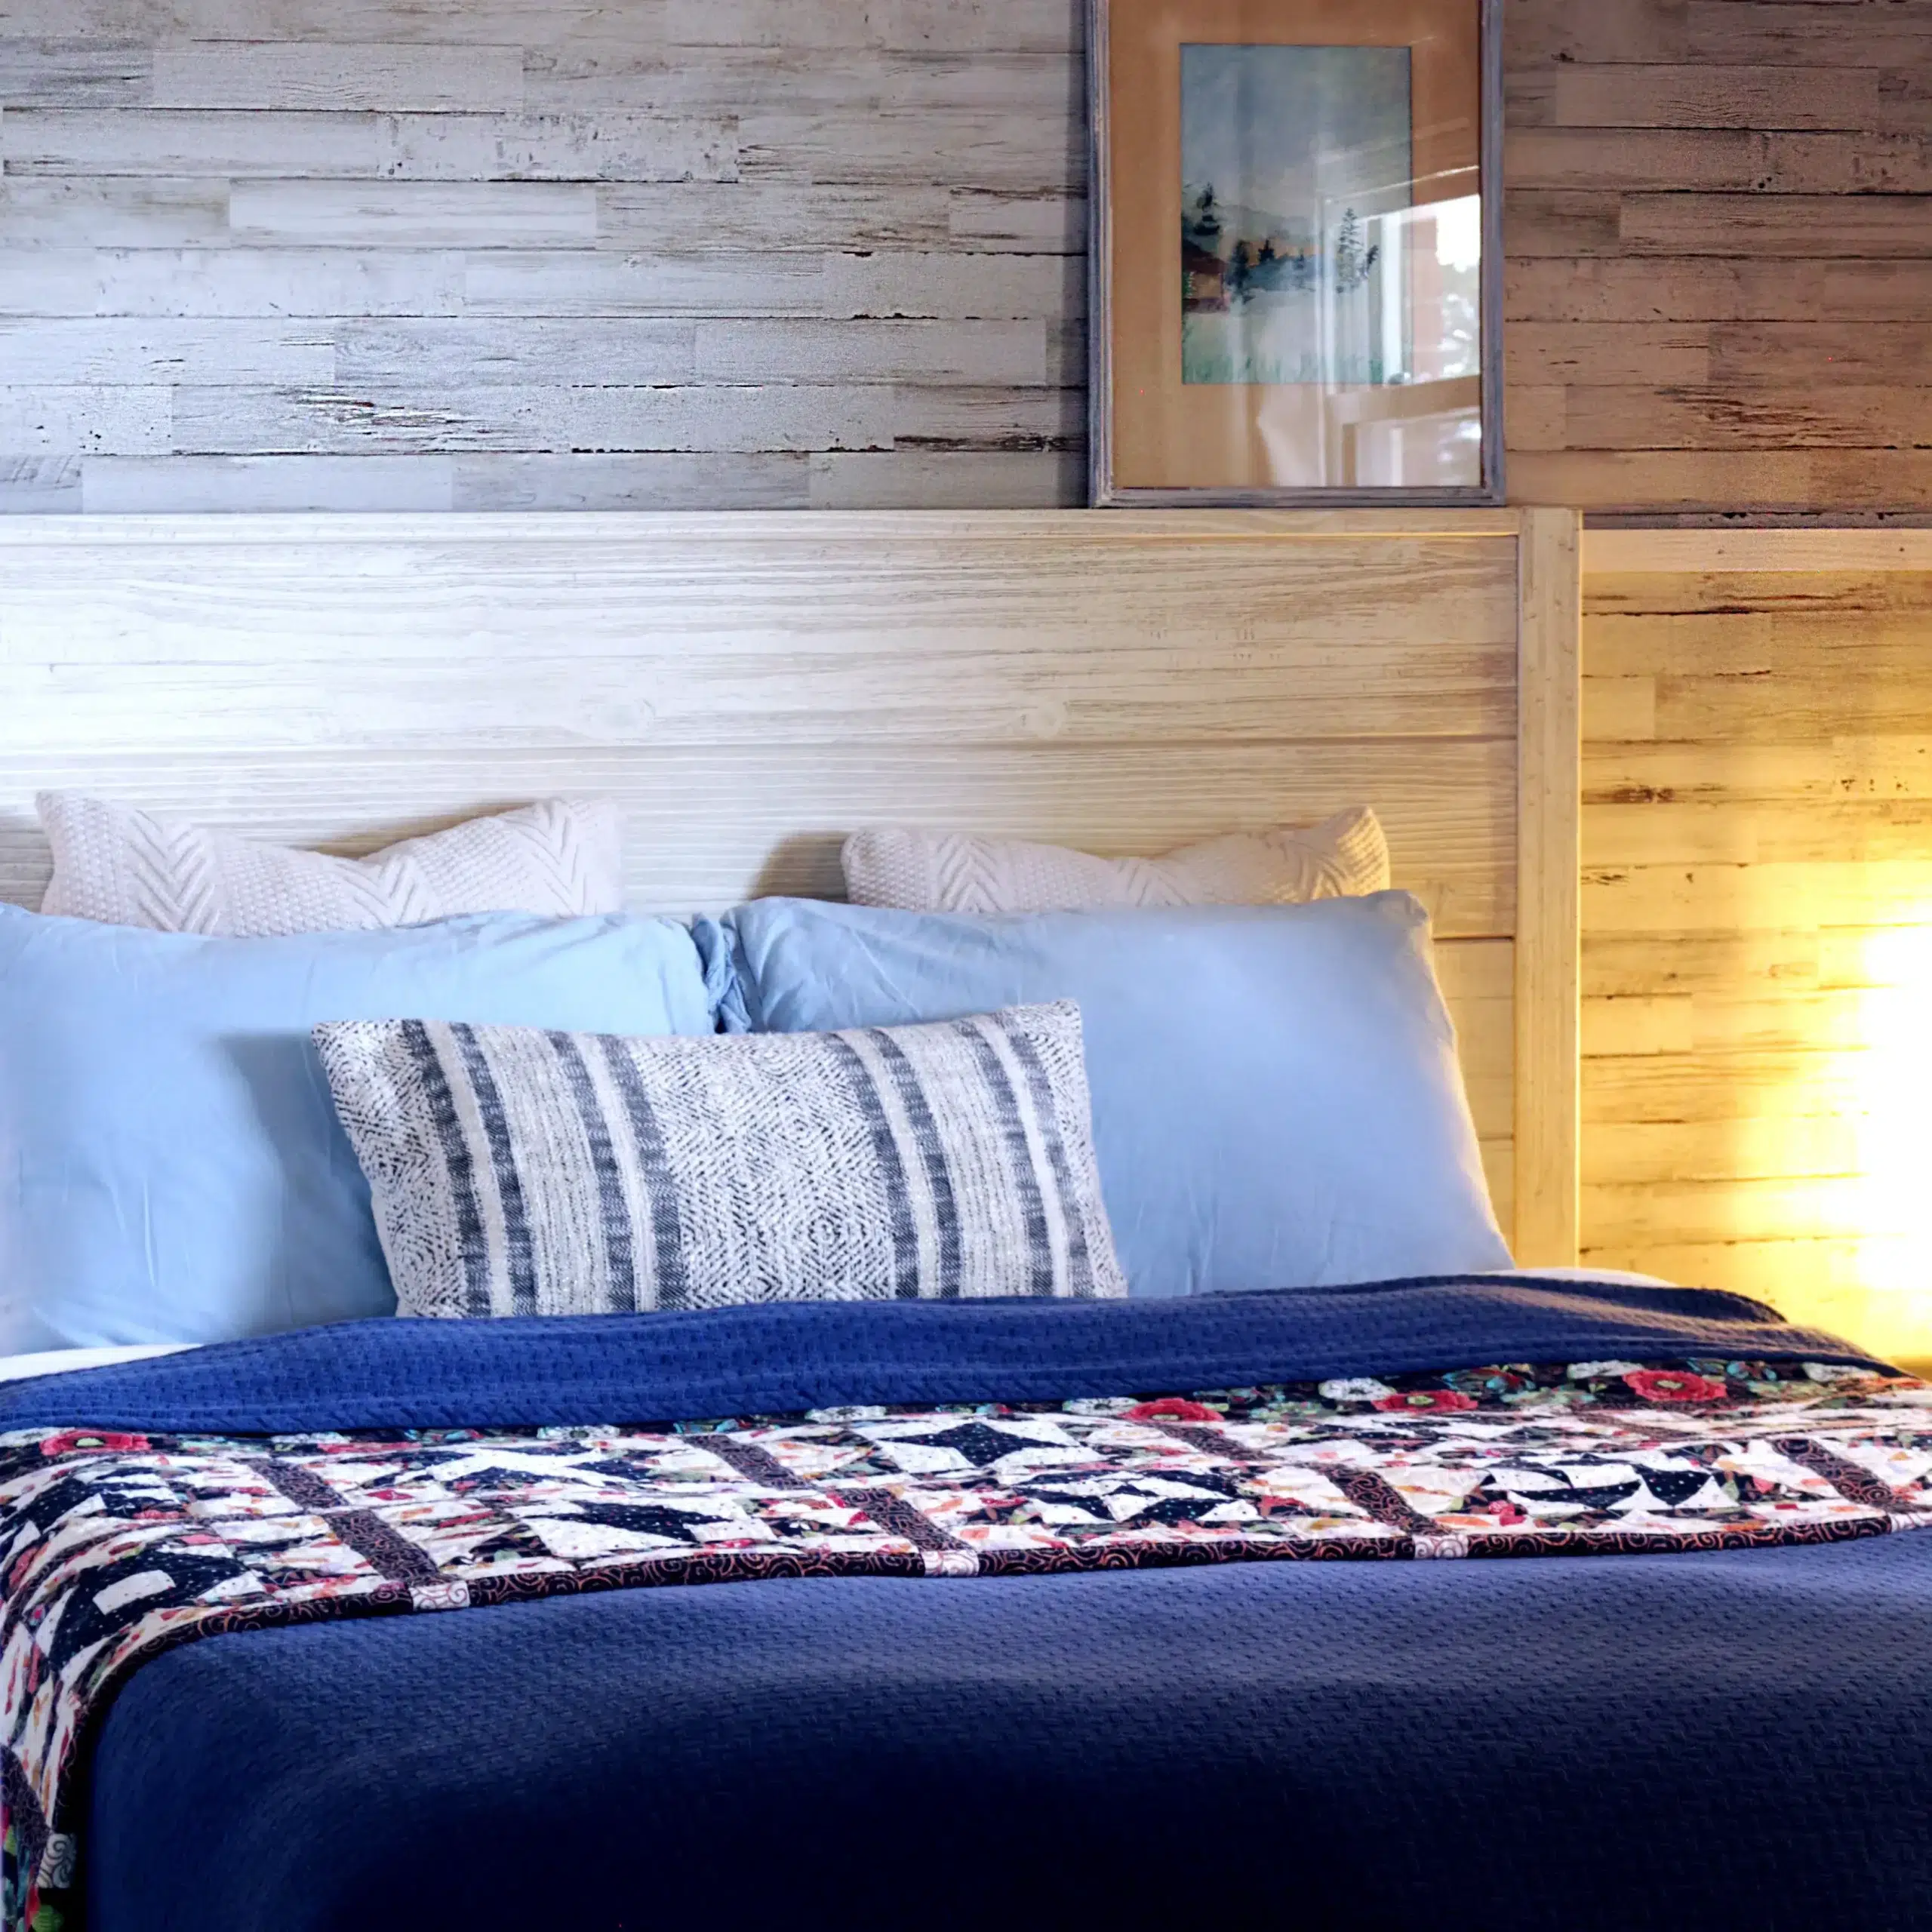 The image shows a tidy bedroom with a bed covered in a blue comforter, assorted blue pillows, and a cream-patterned one. A colorful quilt rests at the bed's foot, and a plain wooden headboard matches the light wood wall paneling behind.